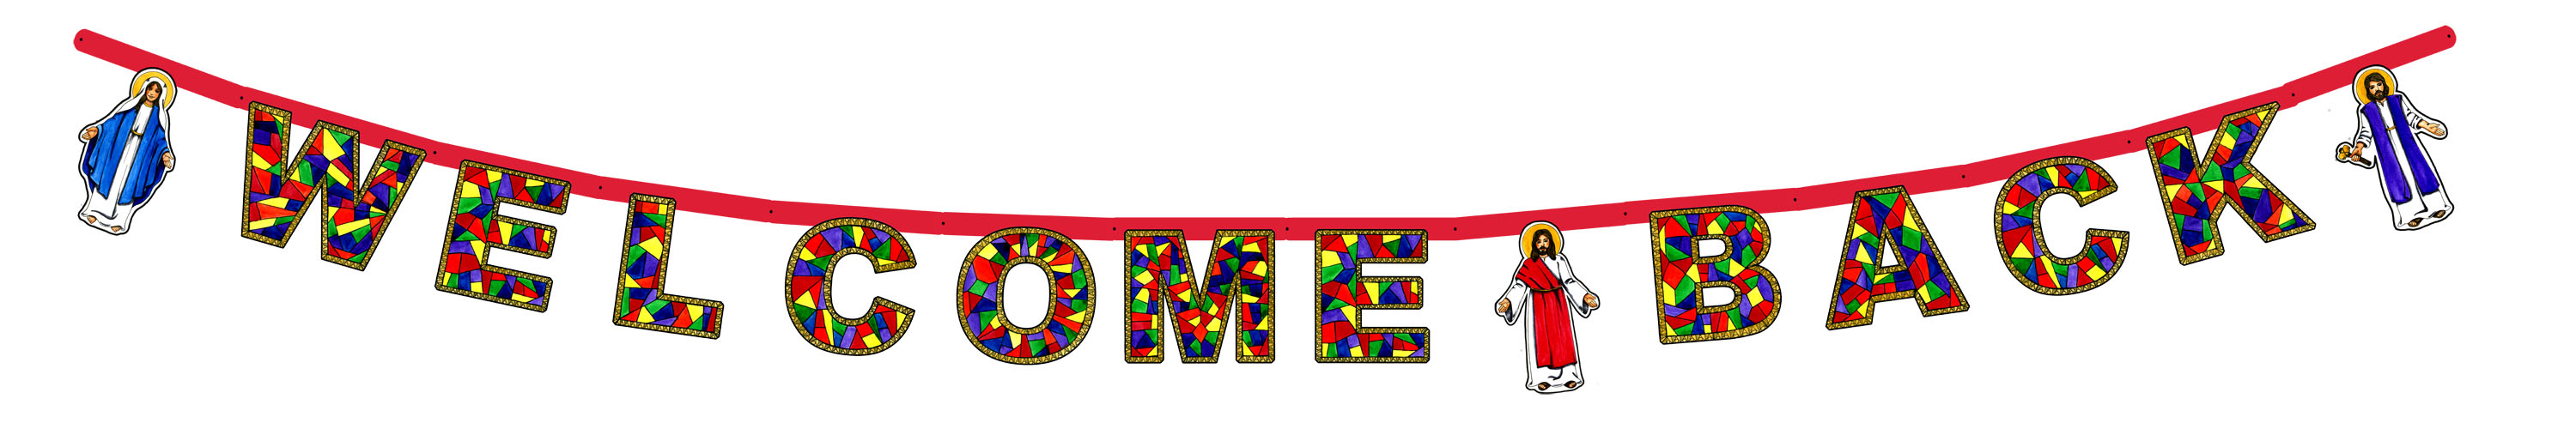 Free Welcome Back To School Signs, Download Free Clip Art